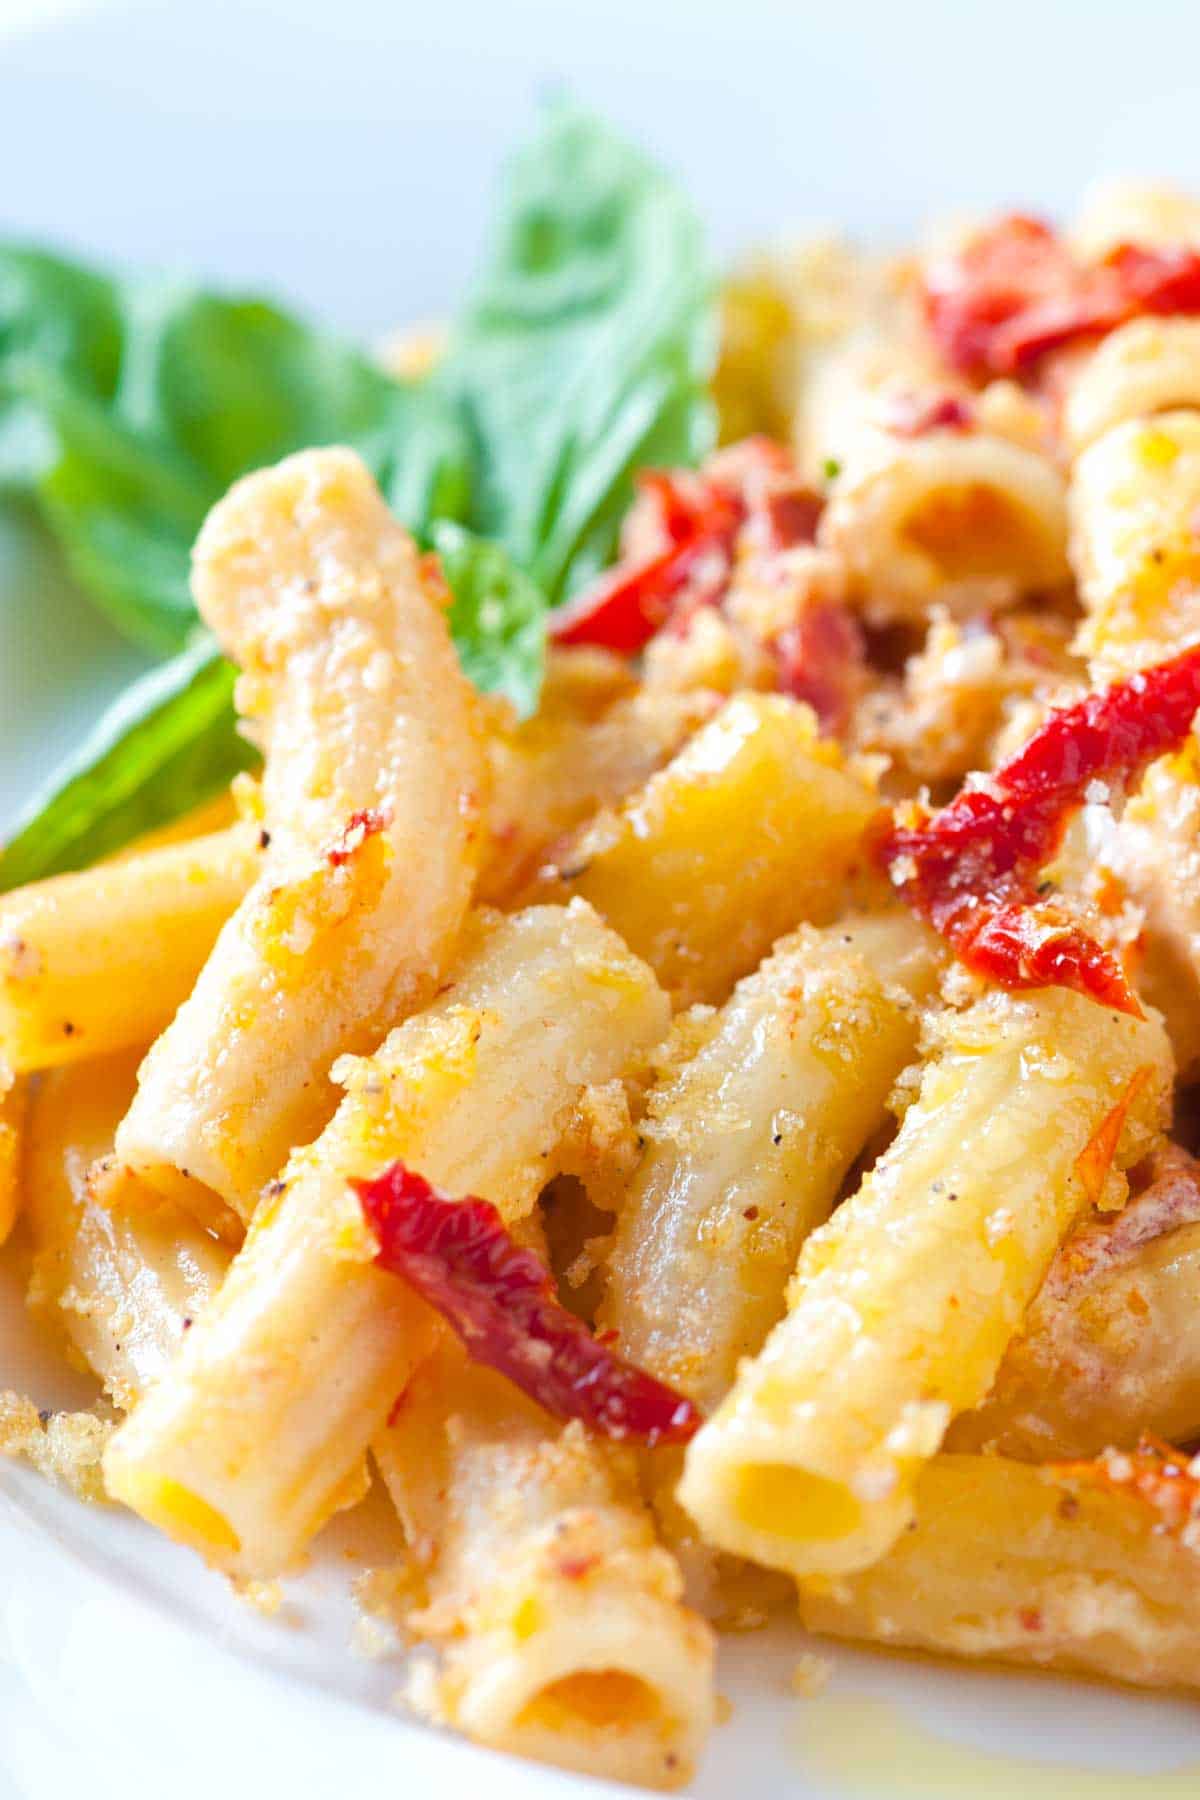 How to Make Creamy Rigatoni with Sun-Dried Tomatoes and Goat Cheese